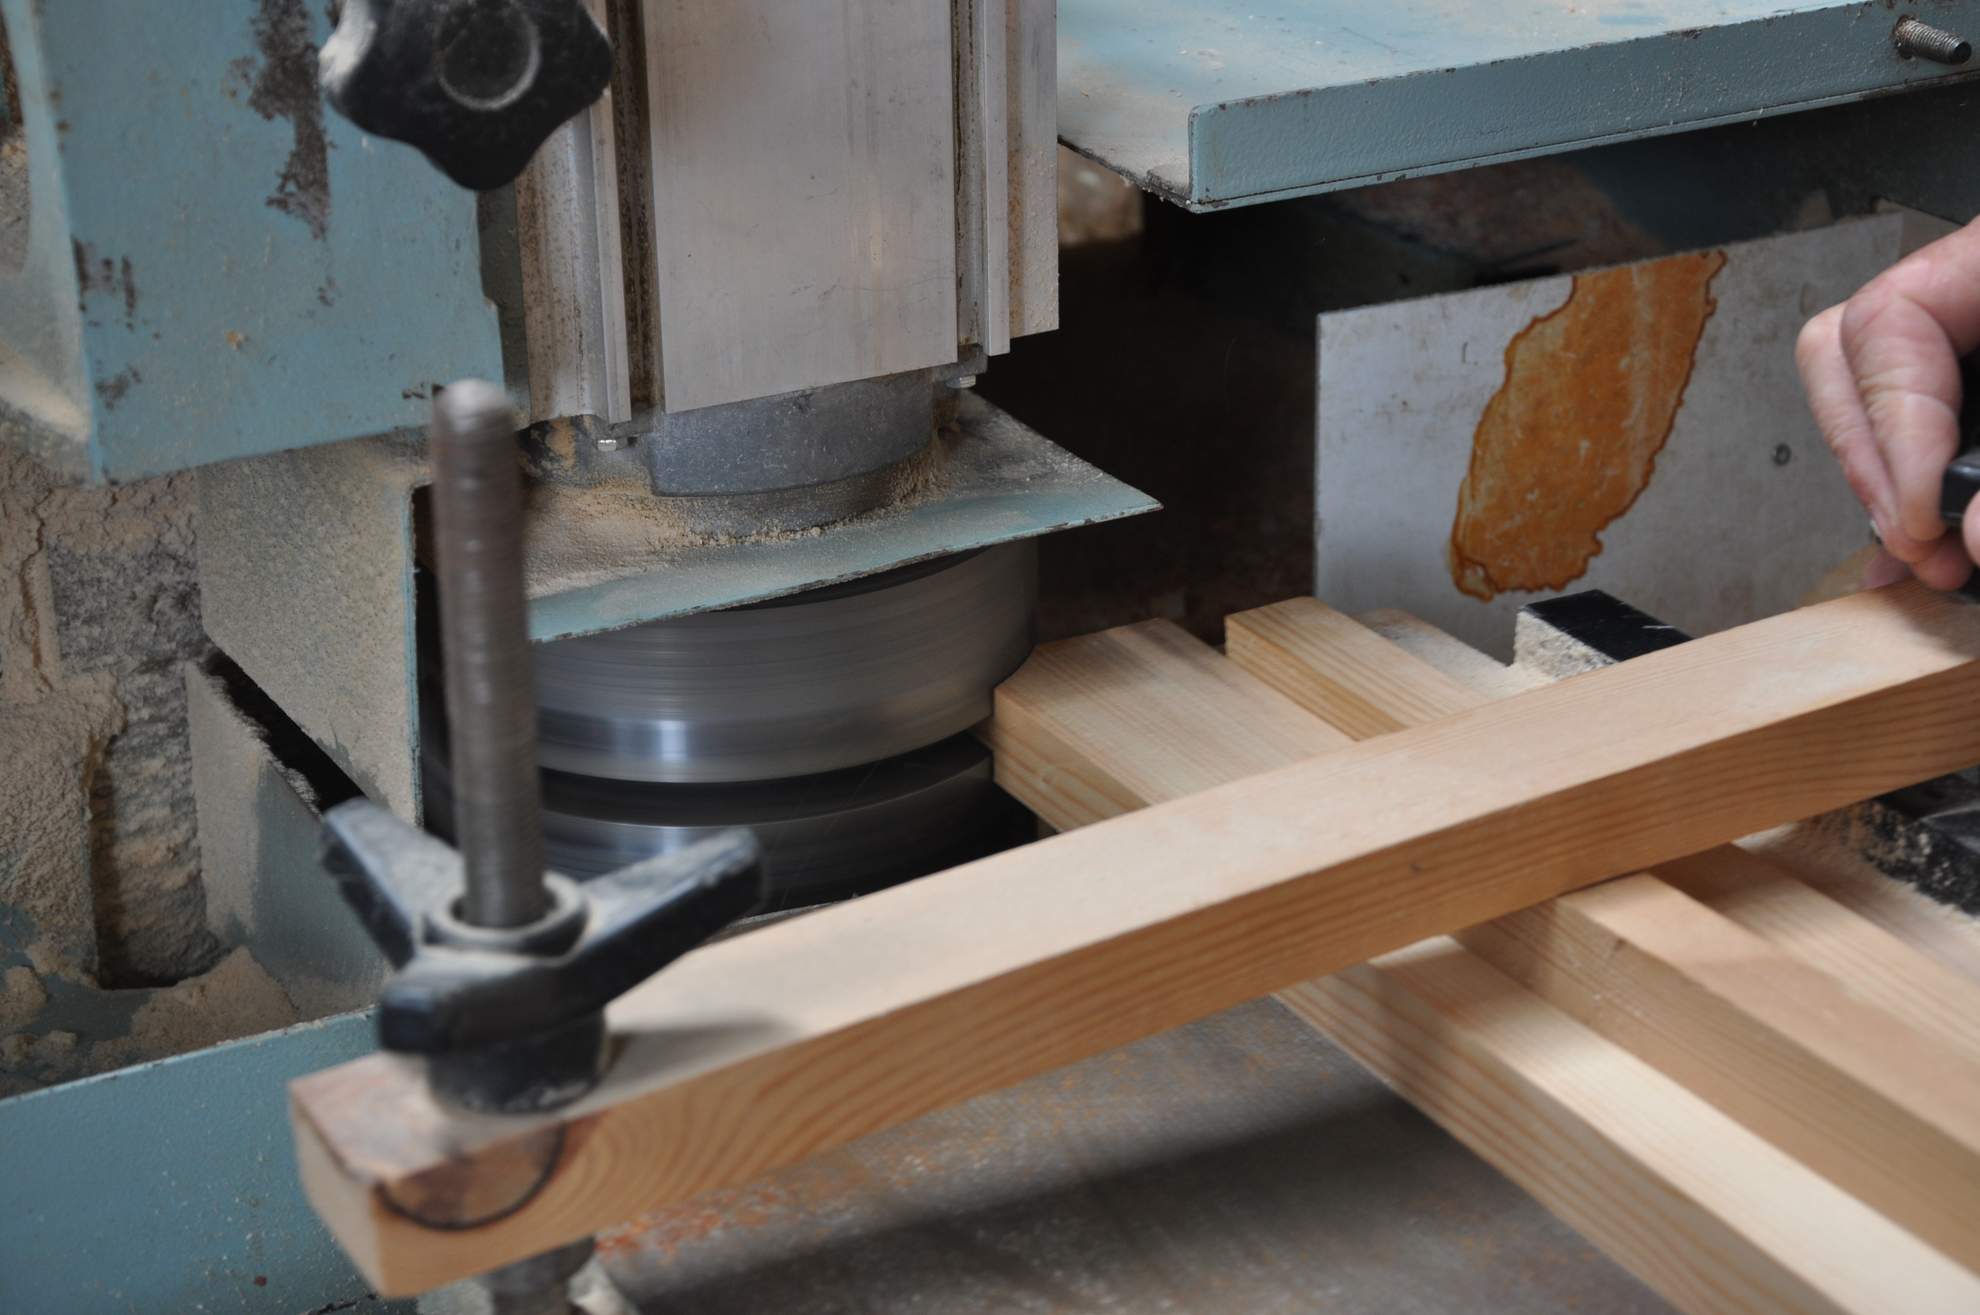 Willie creating tenons for a mortise and tenon joint